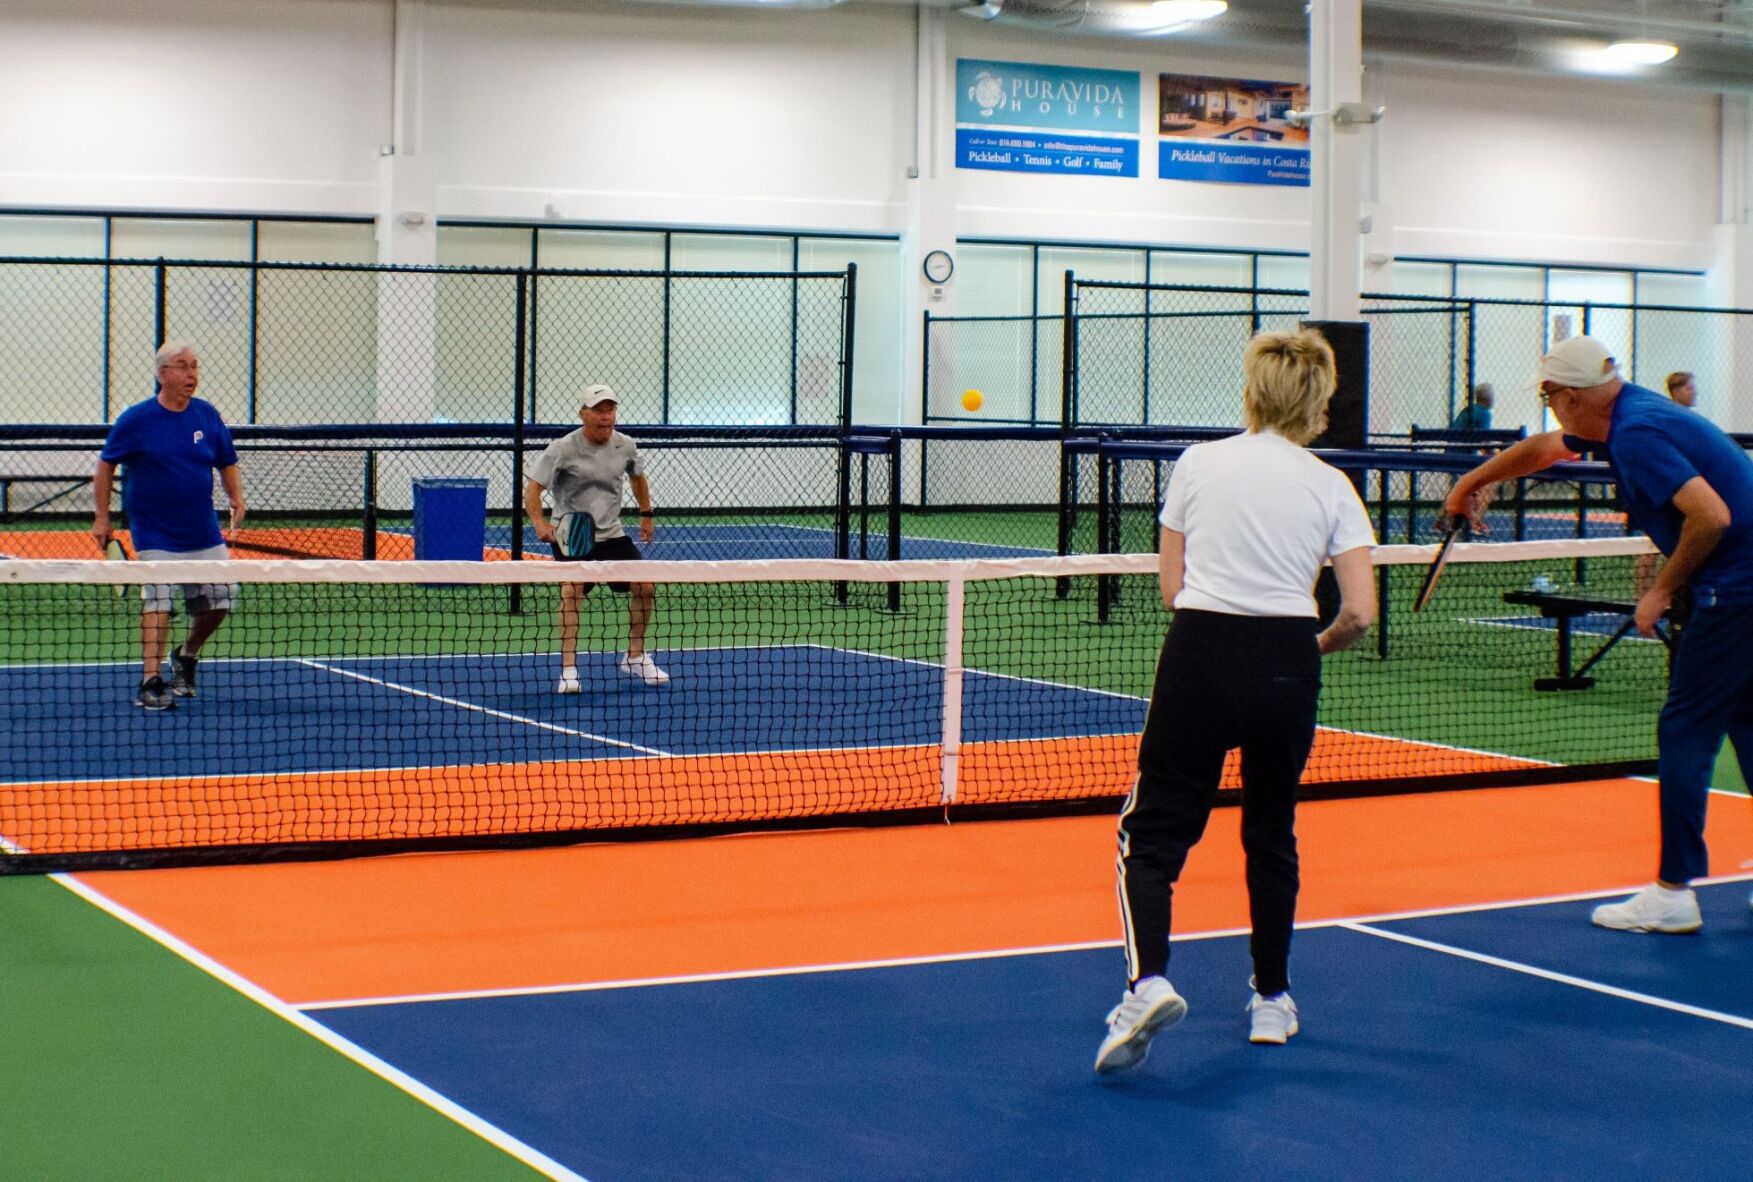 Pickle+Pad+opens+new+indoor+pickleball+facility+with+restaurant